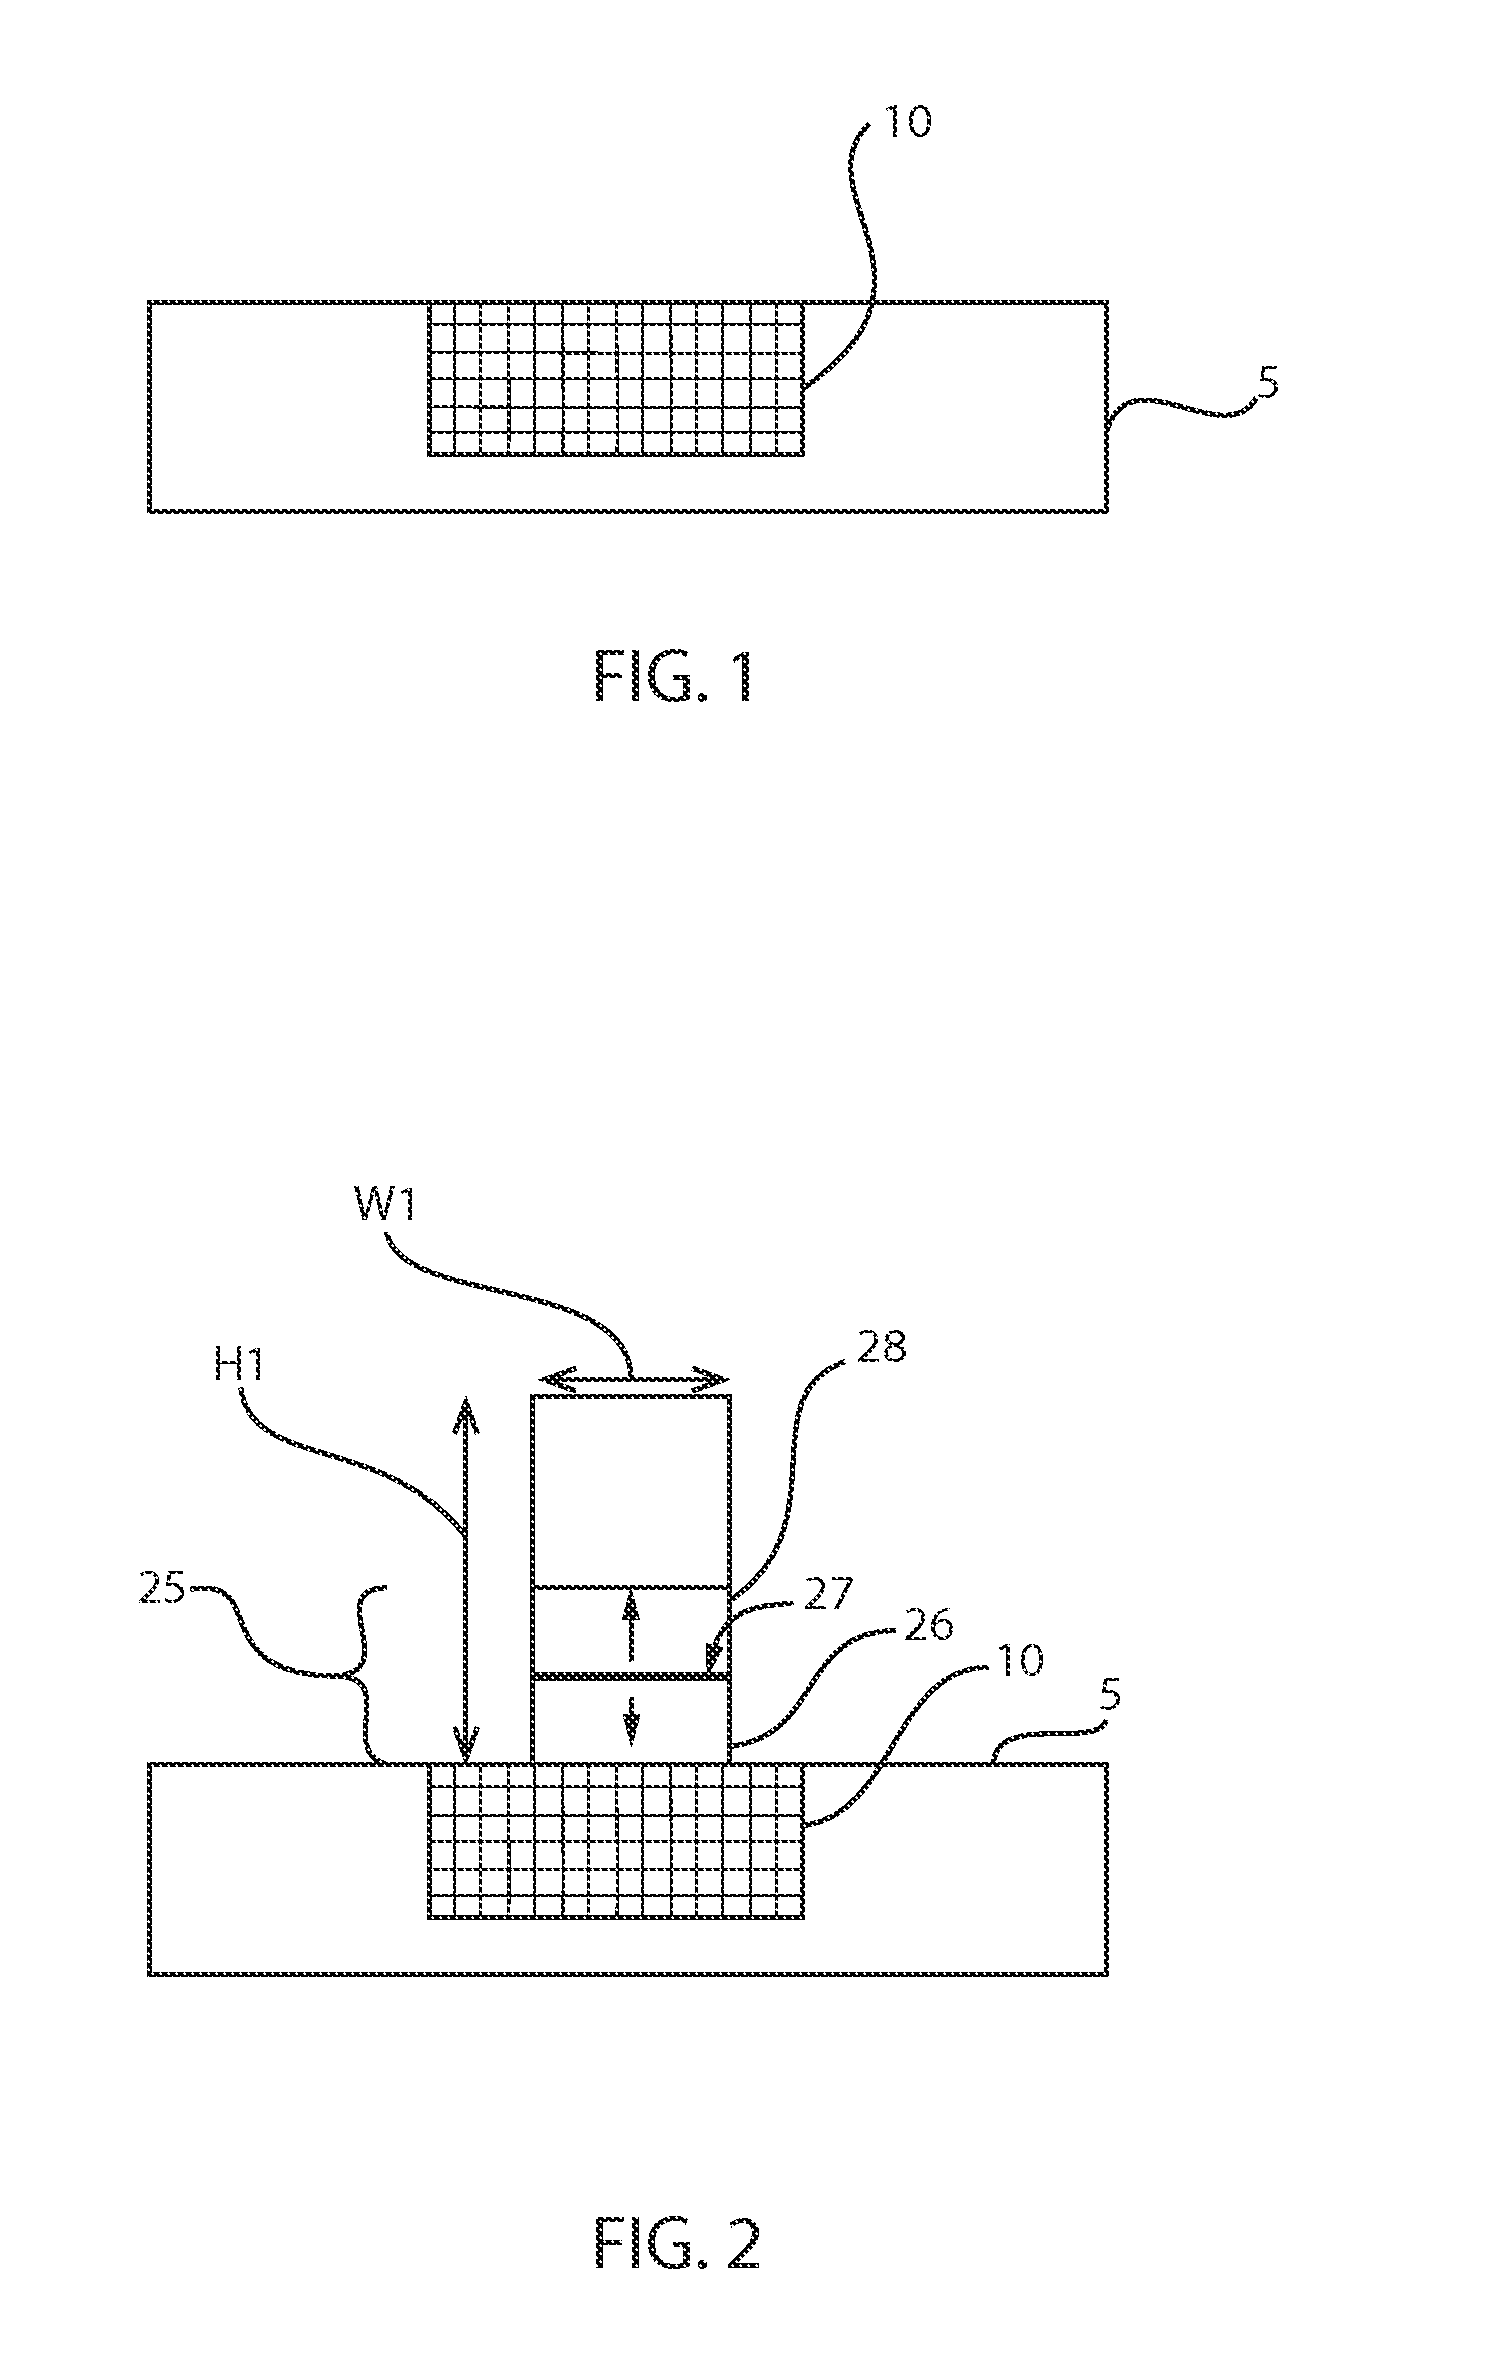 Method of forming an on-pitch self-aligned hard mask for contact to a tunnel junction using ion beam etching